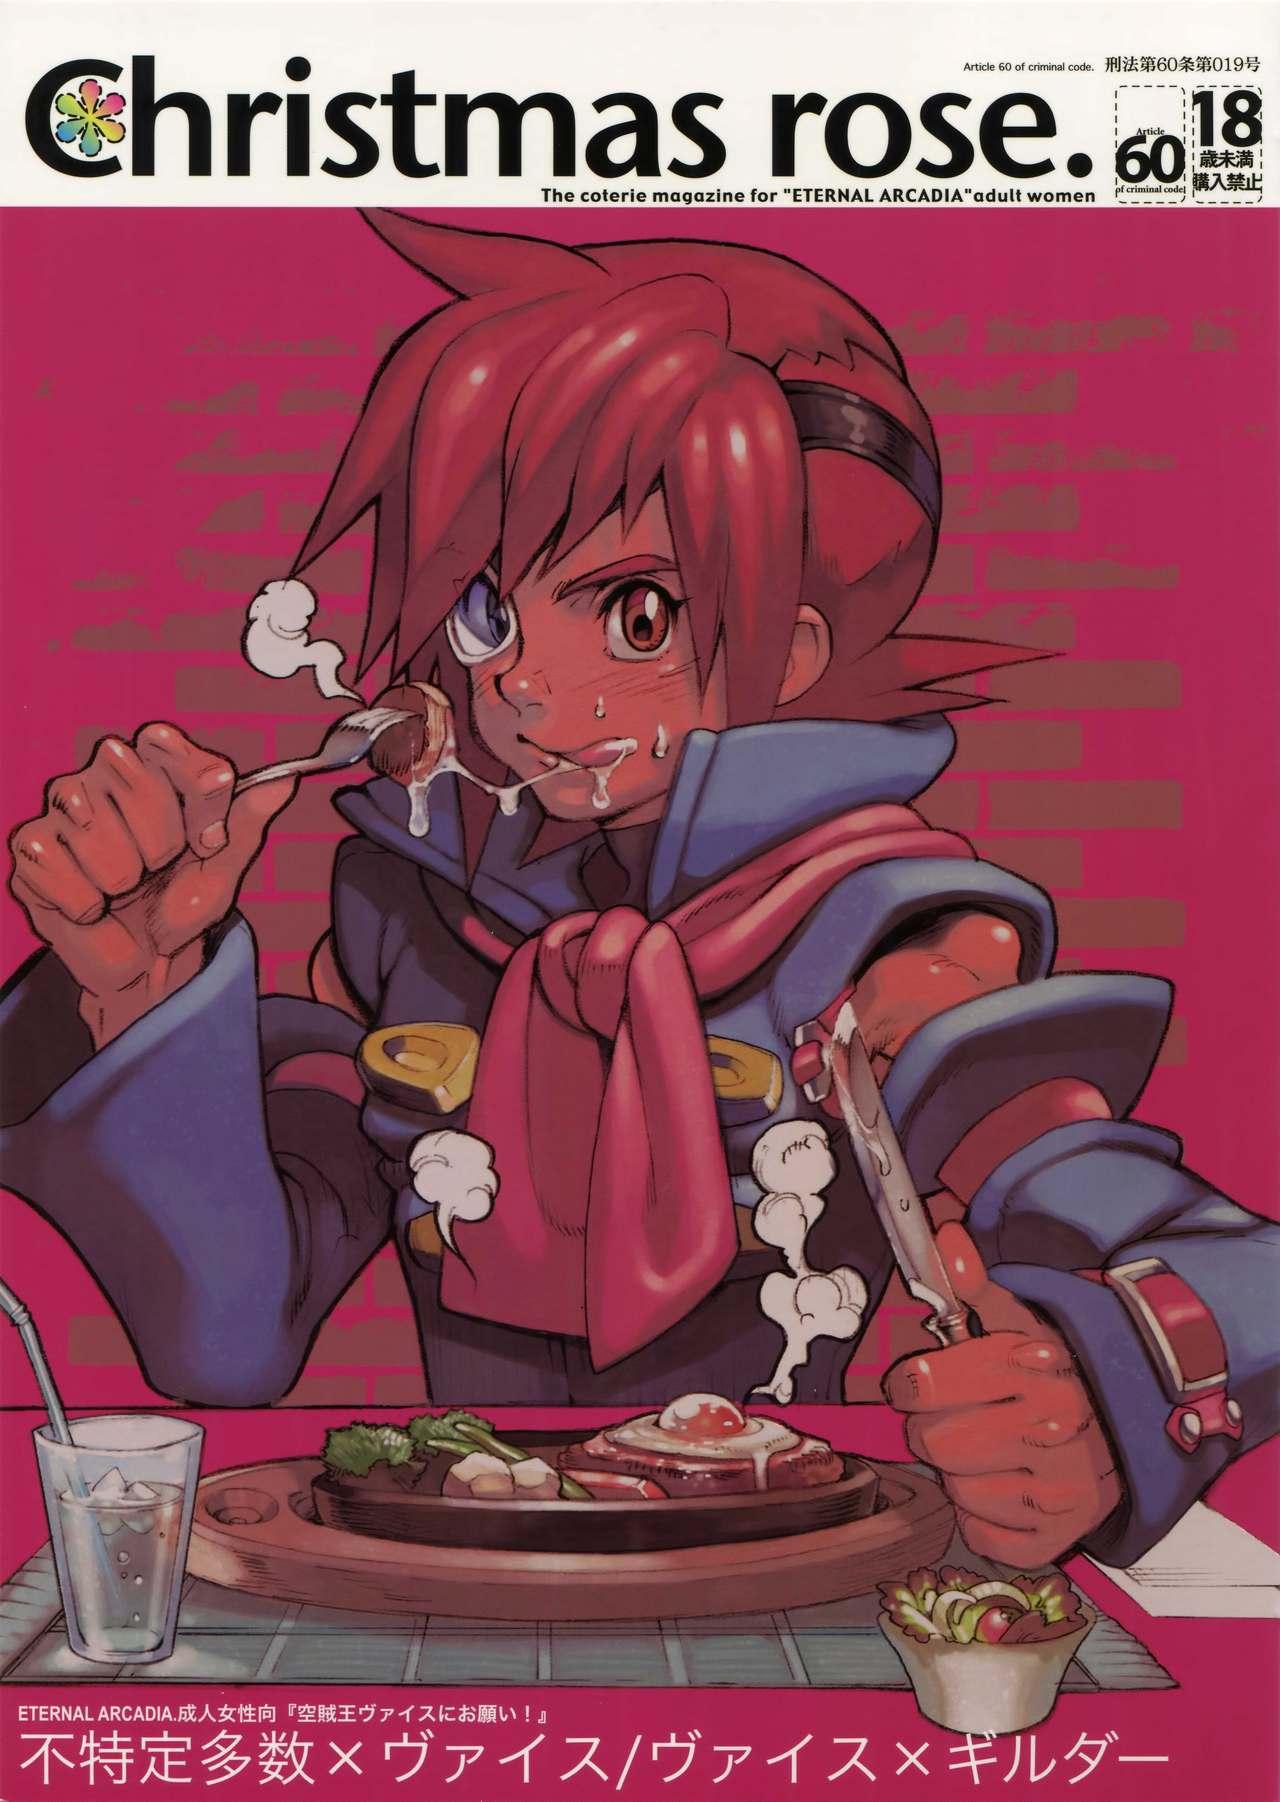 Friend Christmas Rose. - Skies of arcadia Price - Picture 1